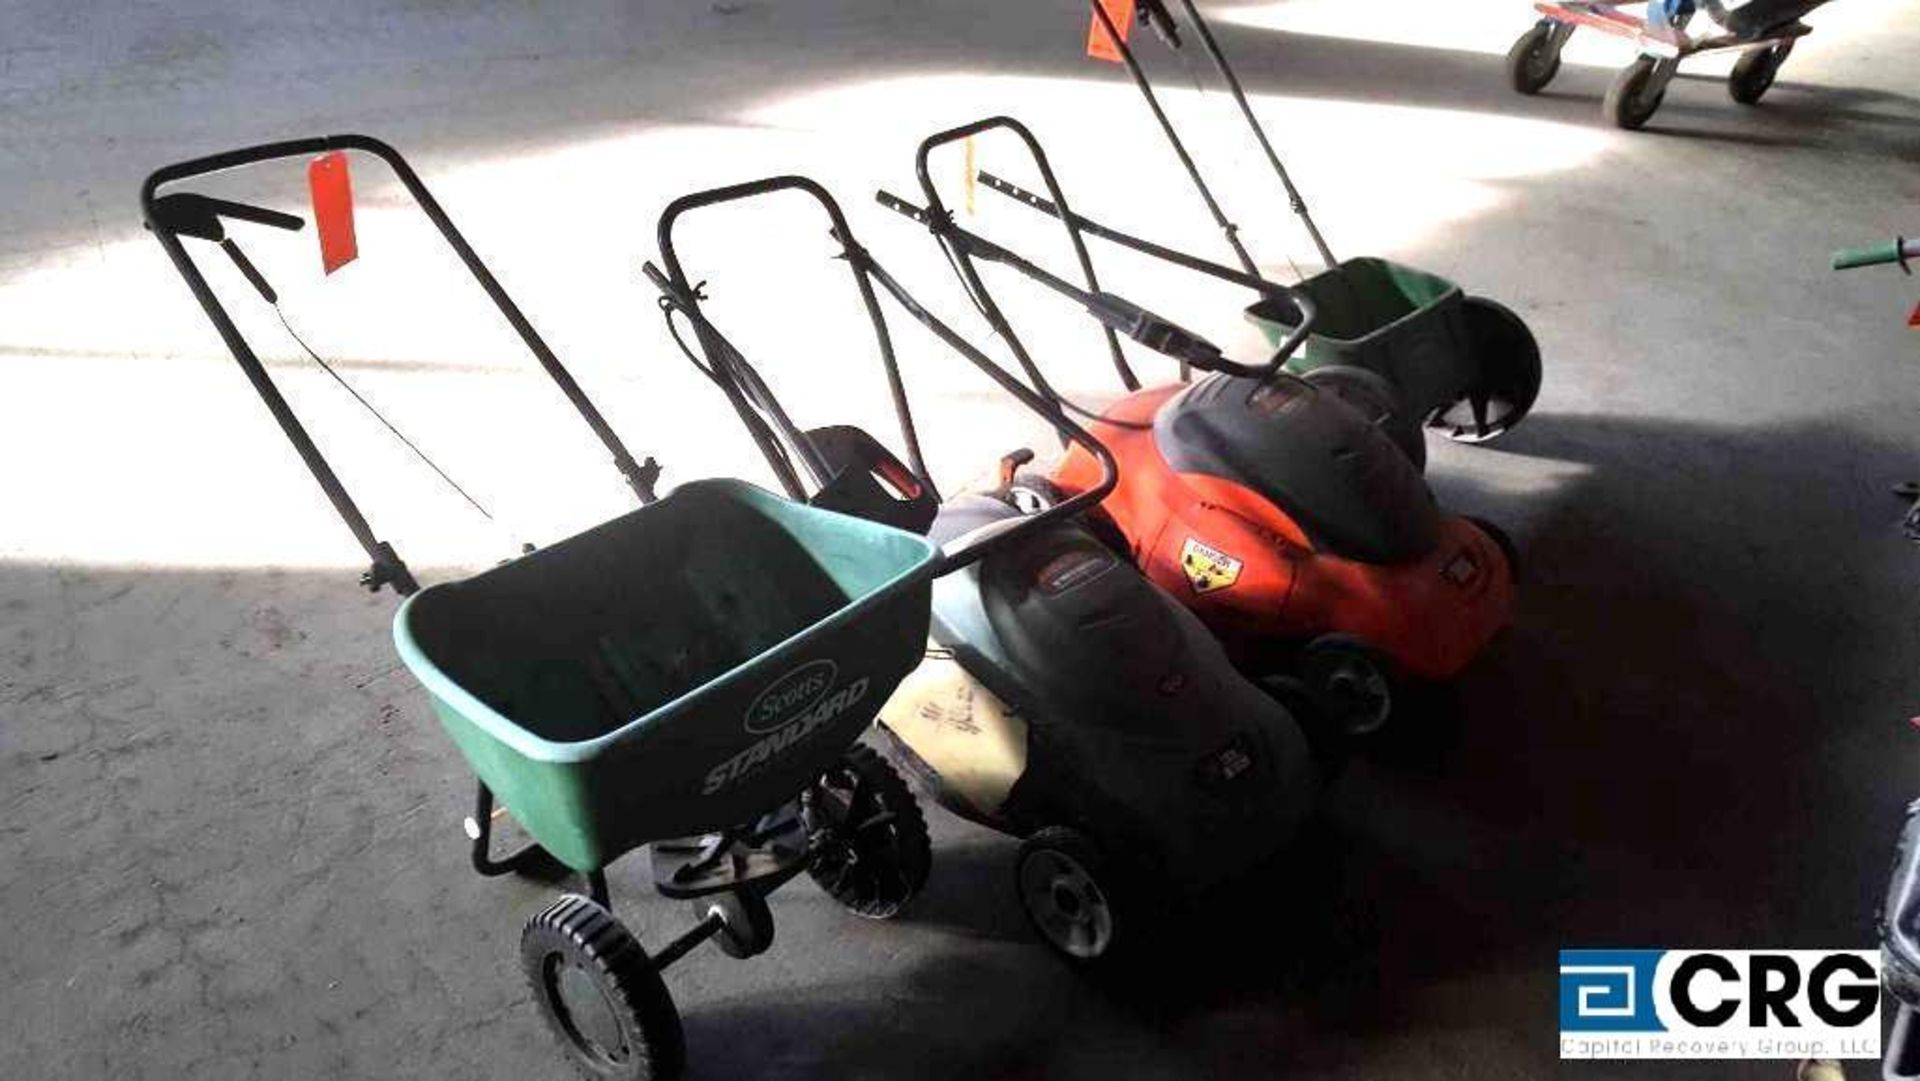 Lot of assorted electric lawn mowers and spreaders. Mowers are Black and Decker, spreaders are